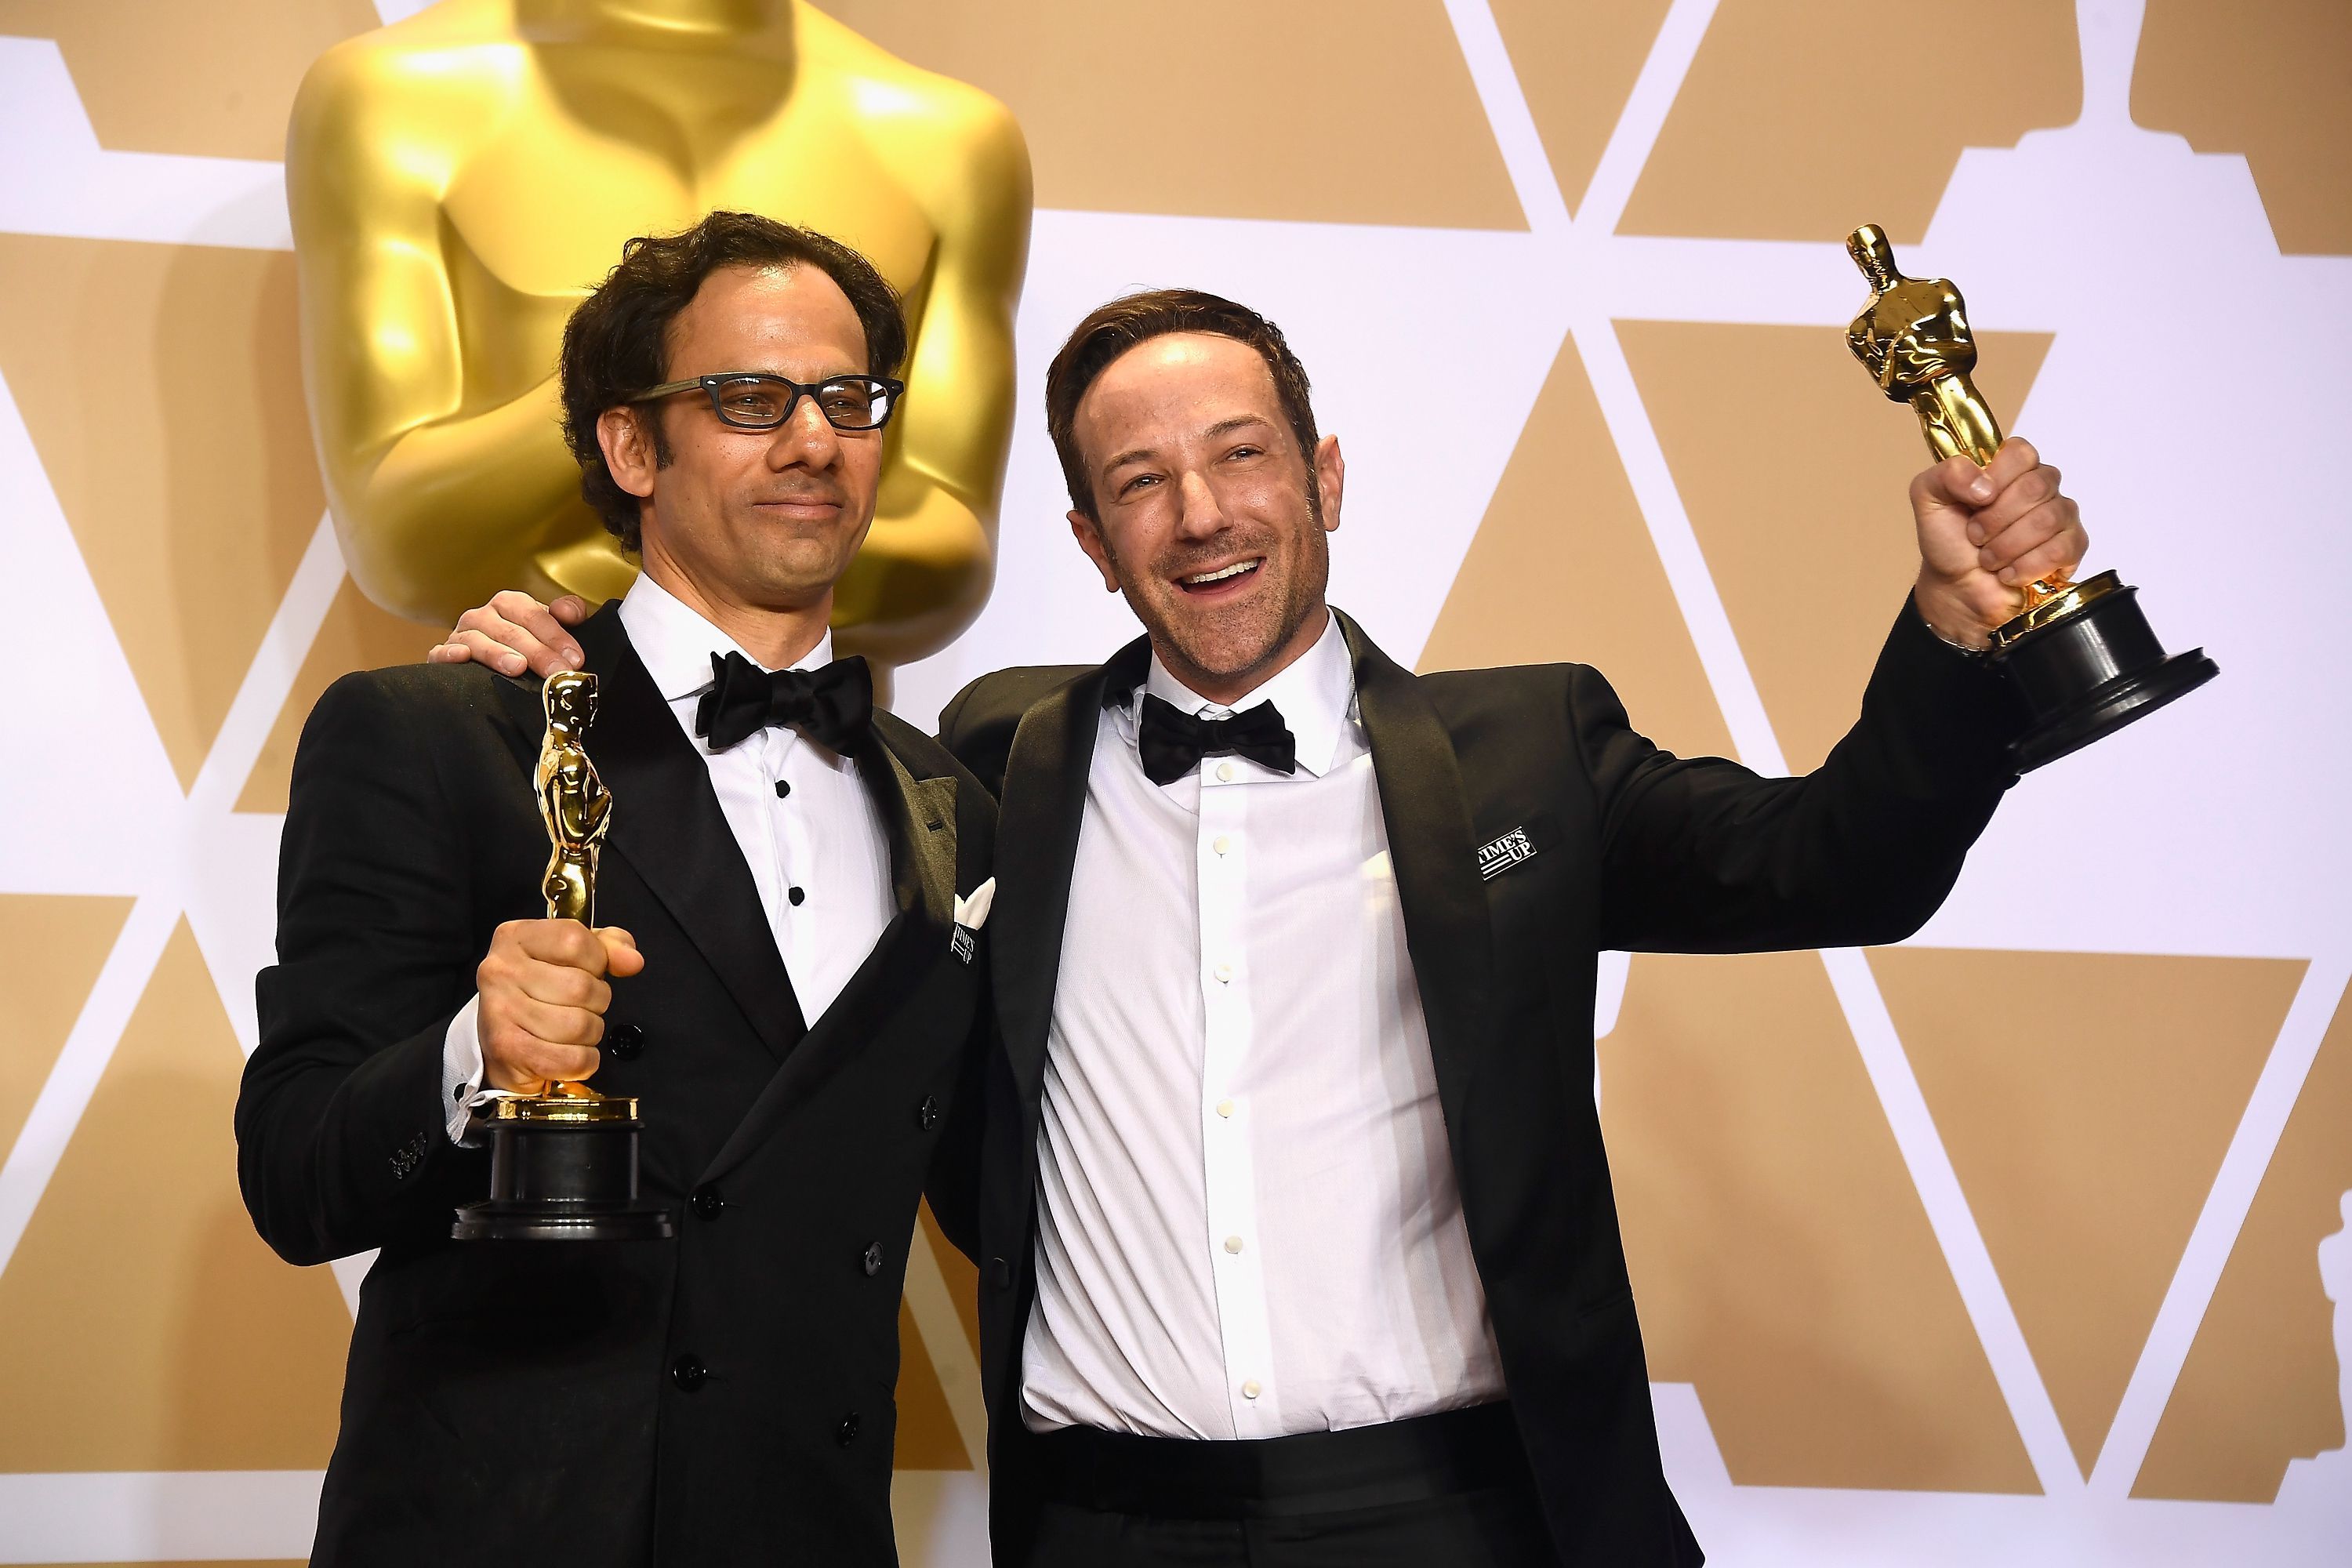 Producer Dan Cogan (l) and director Bryan Foge after winning Best Documentary Feature at the Academy Awards in 2018